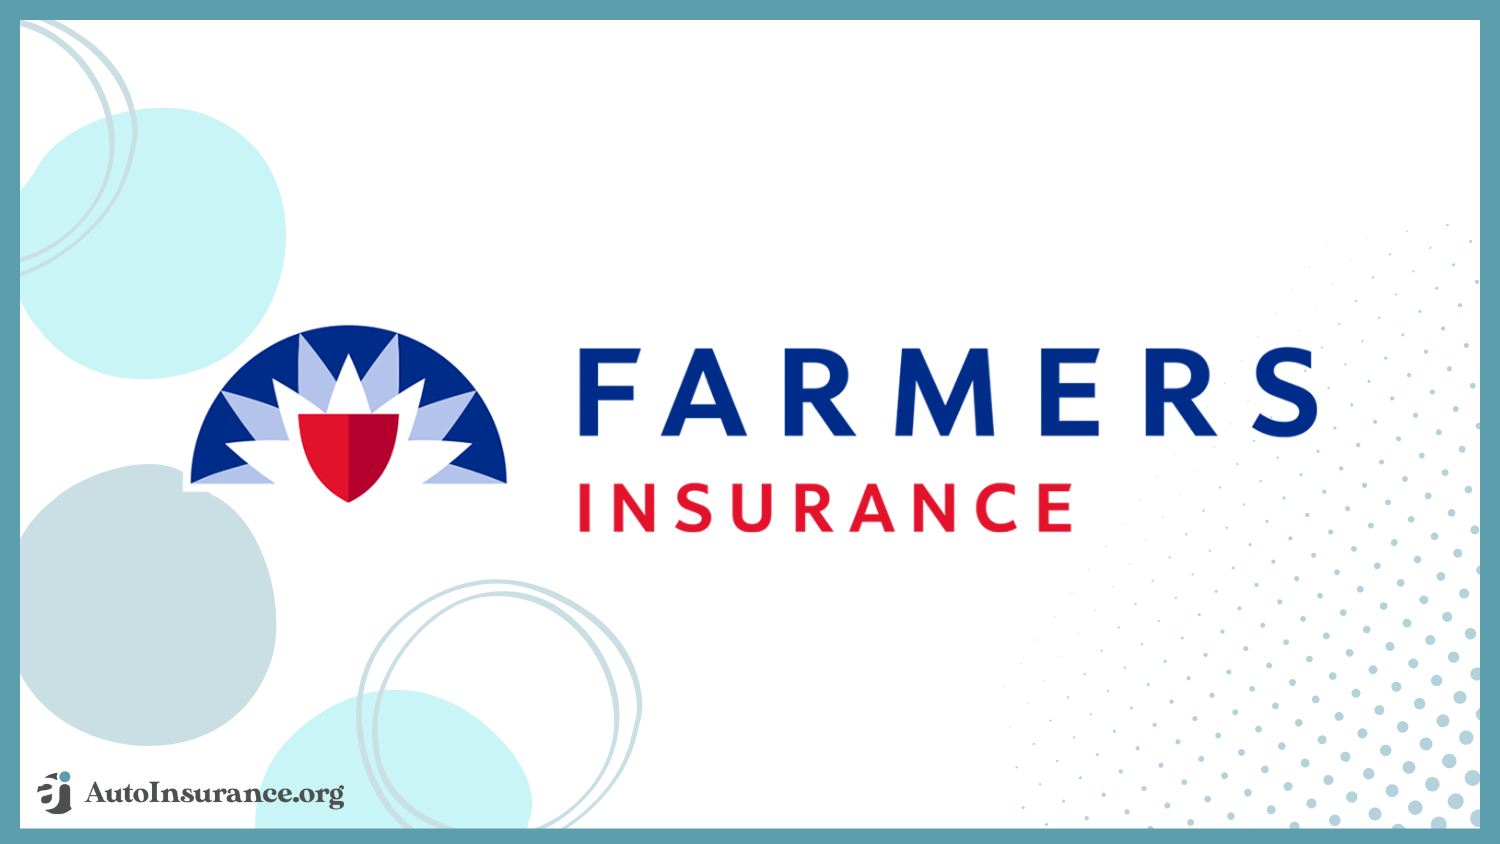 Farmers best auto insurance companies that offer cash back for safe drivers
